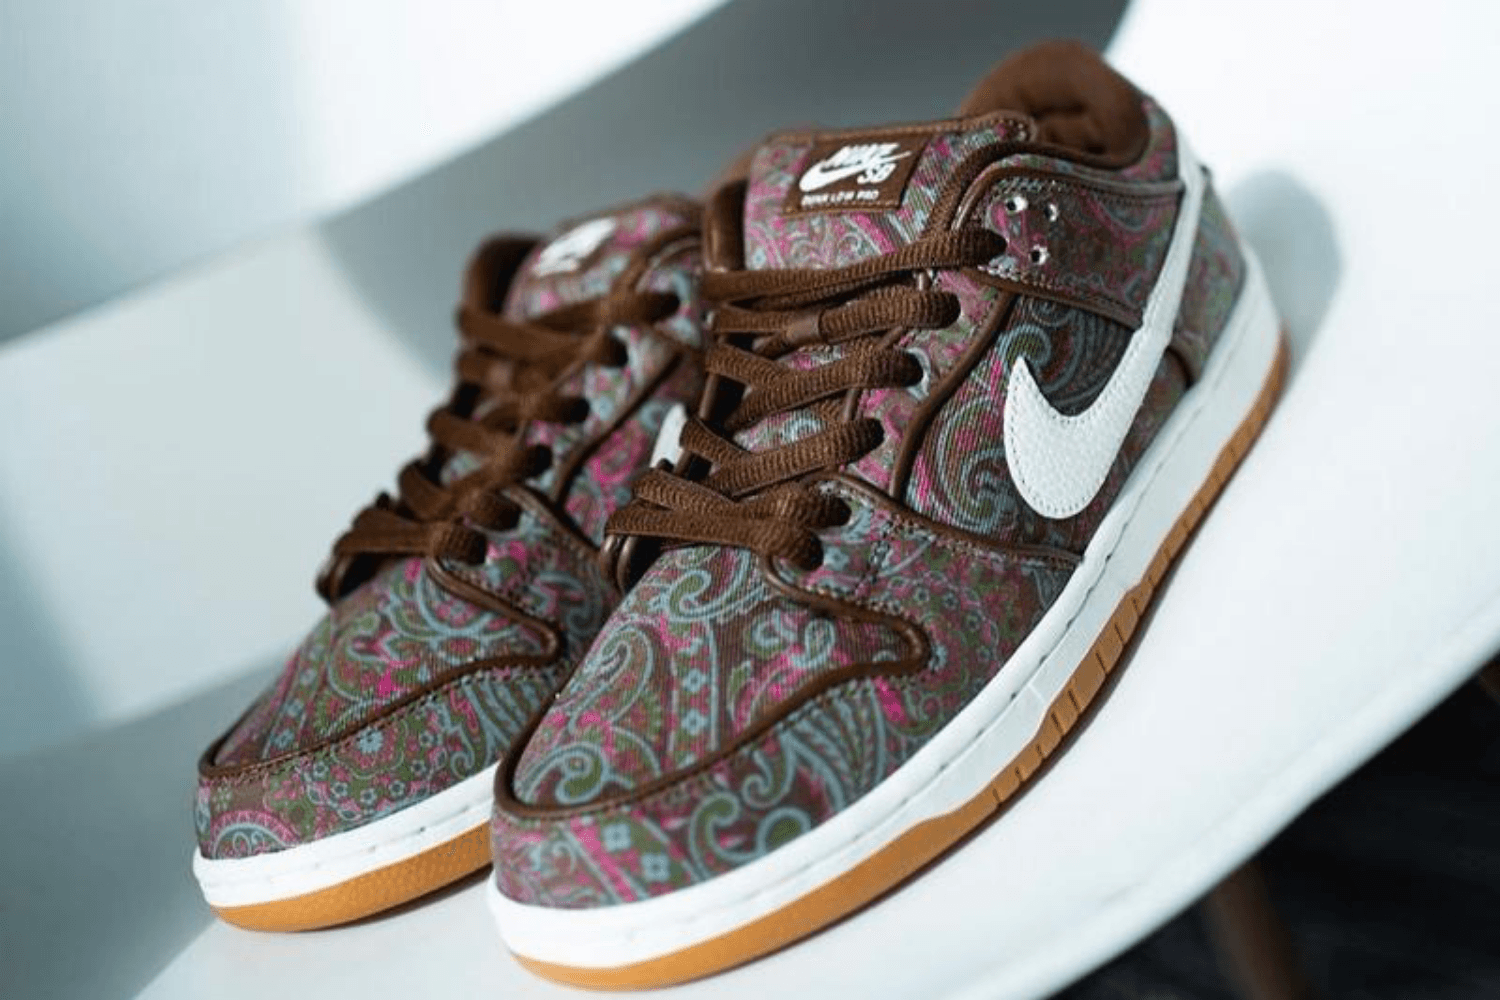 The Nike SB Dunk Low 'Brown Paisley' in detail